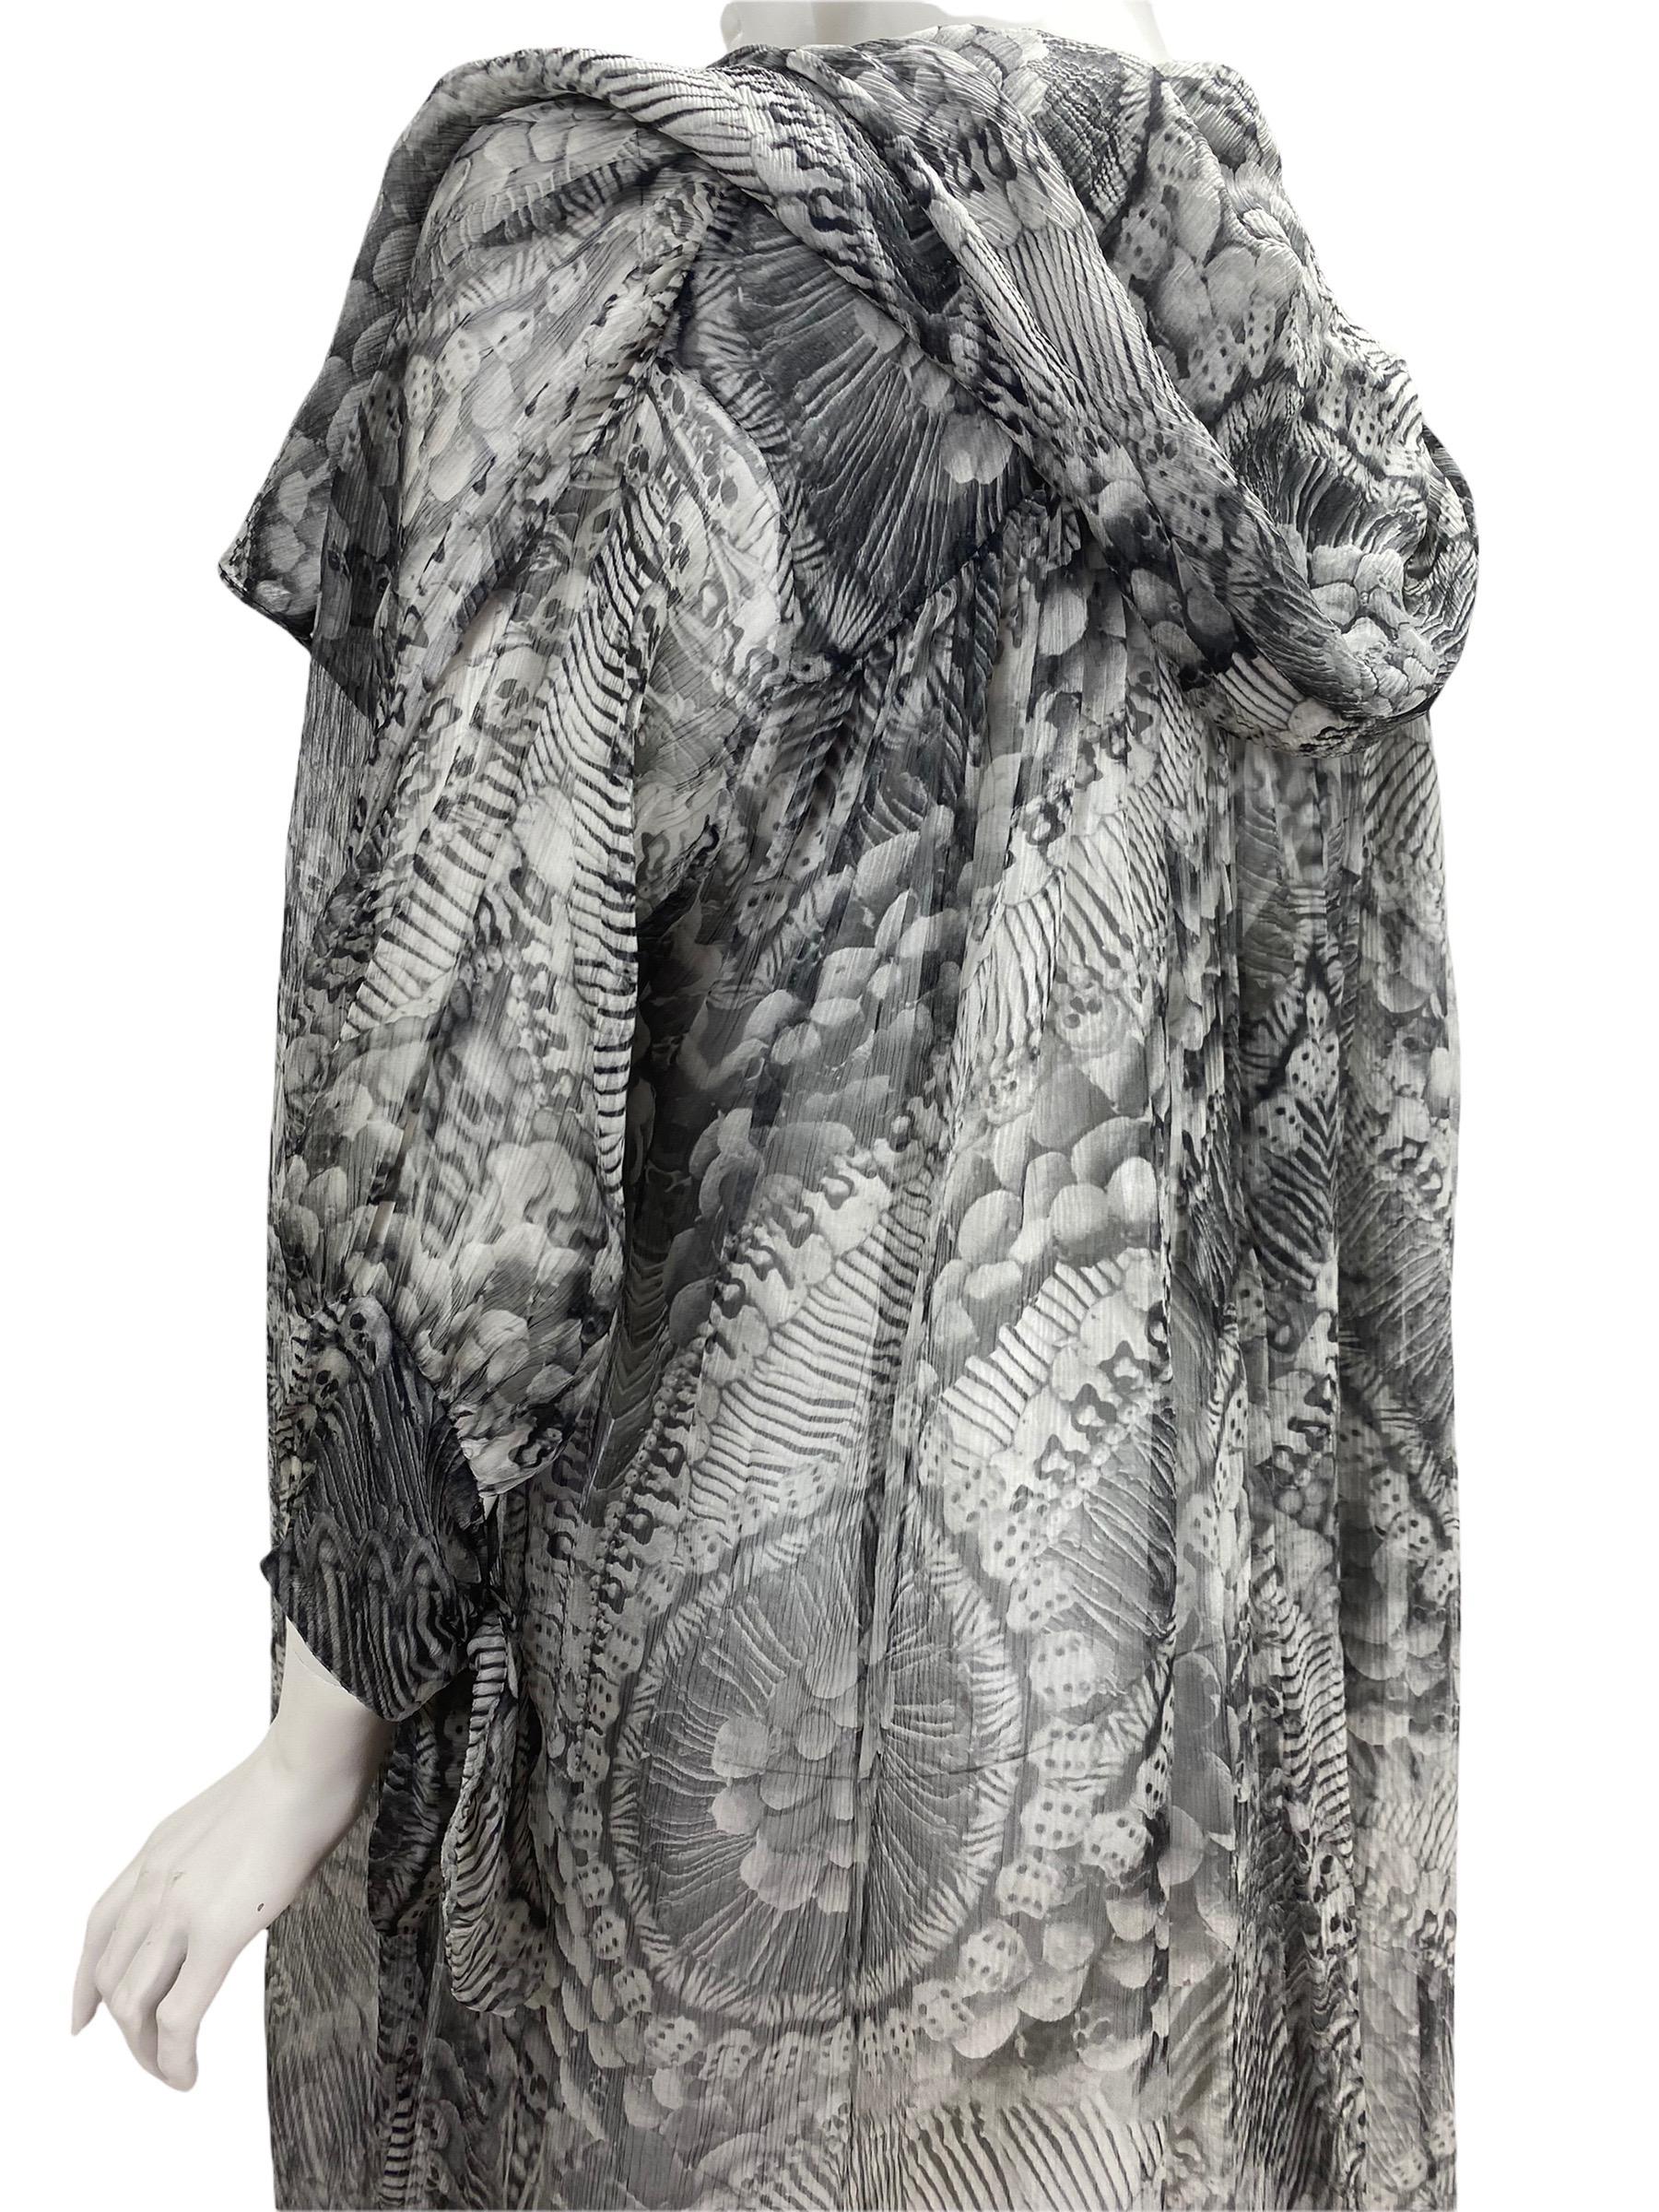 2010 Alexander McQueen Scull Print Silk Top with Scarf For Sale 3